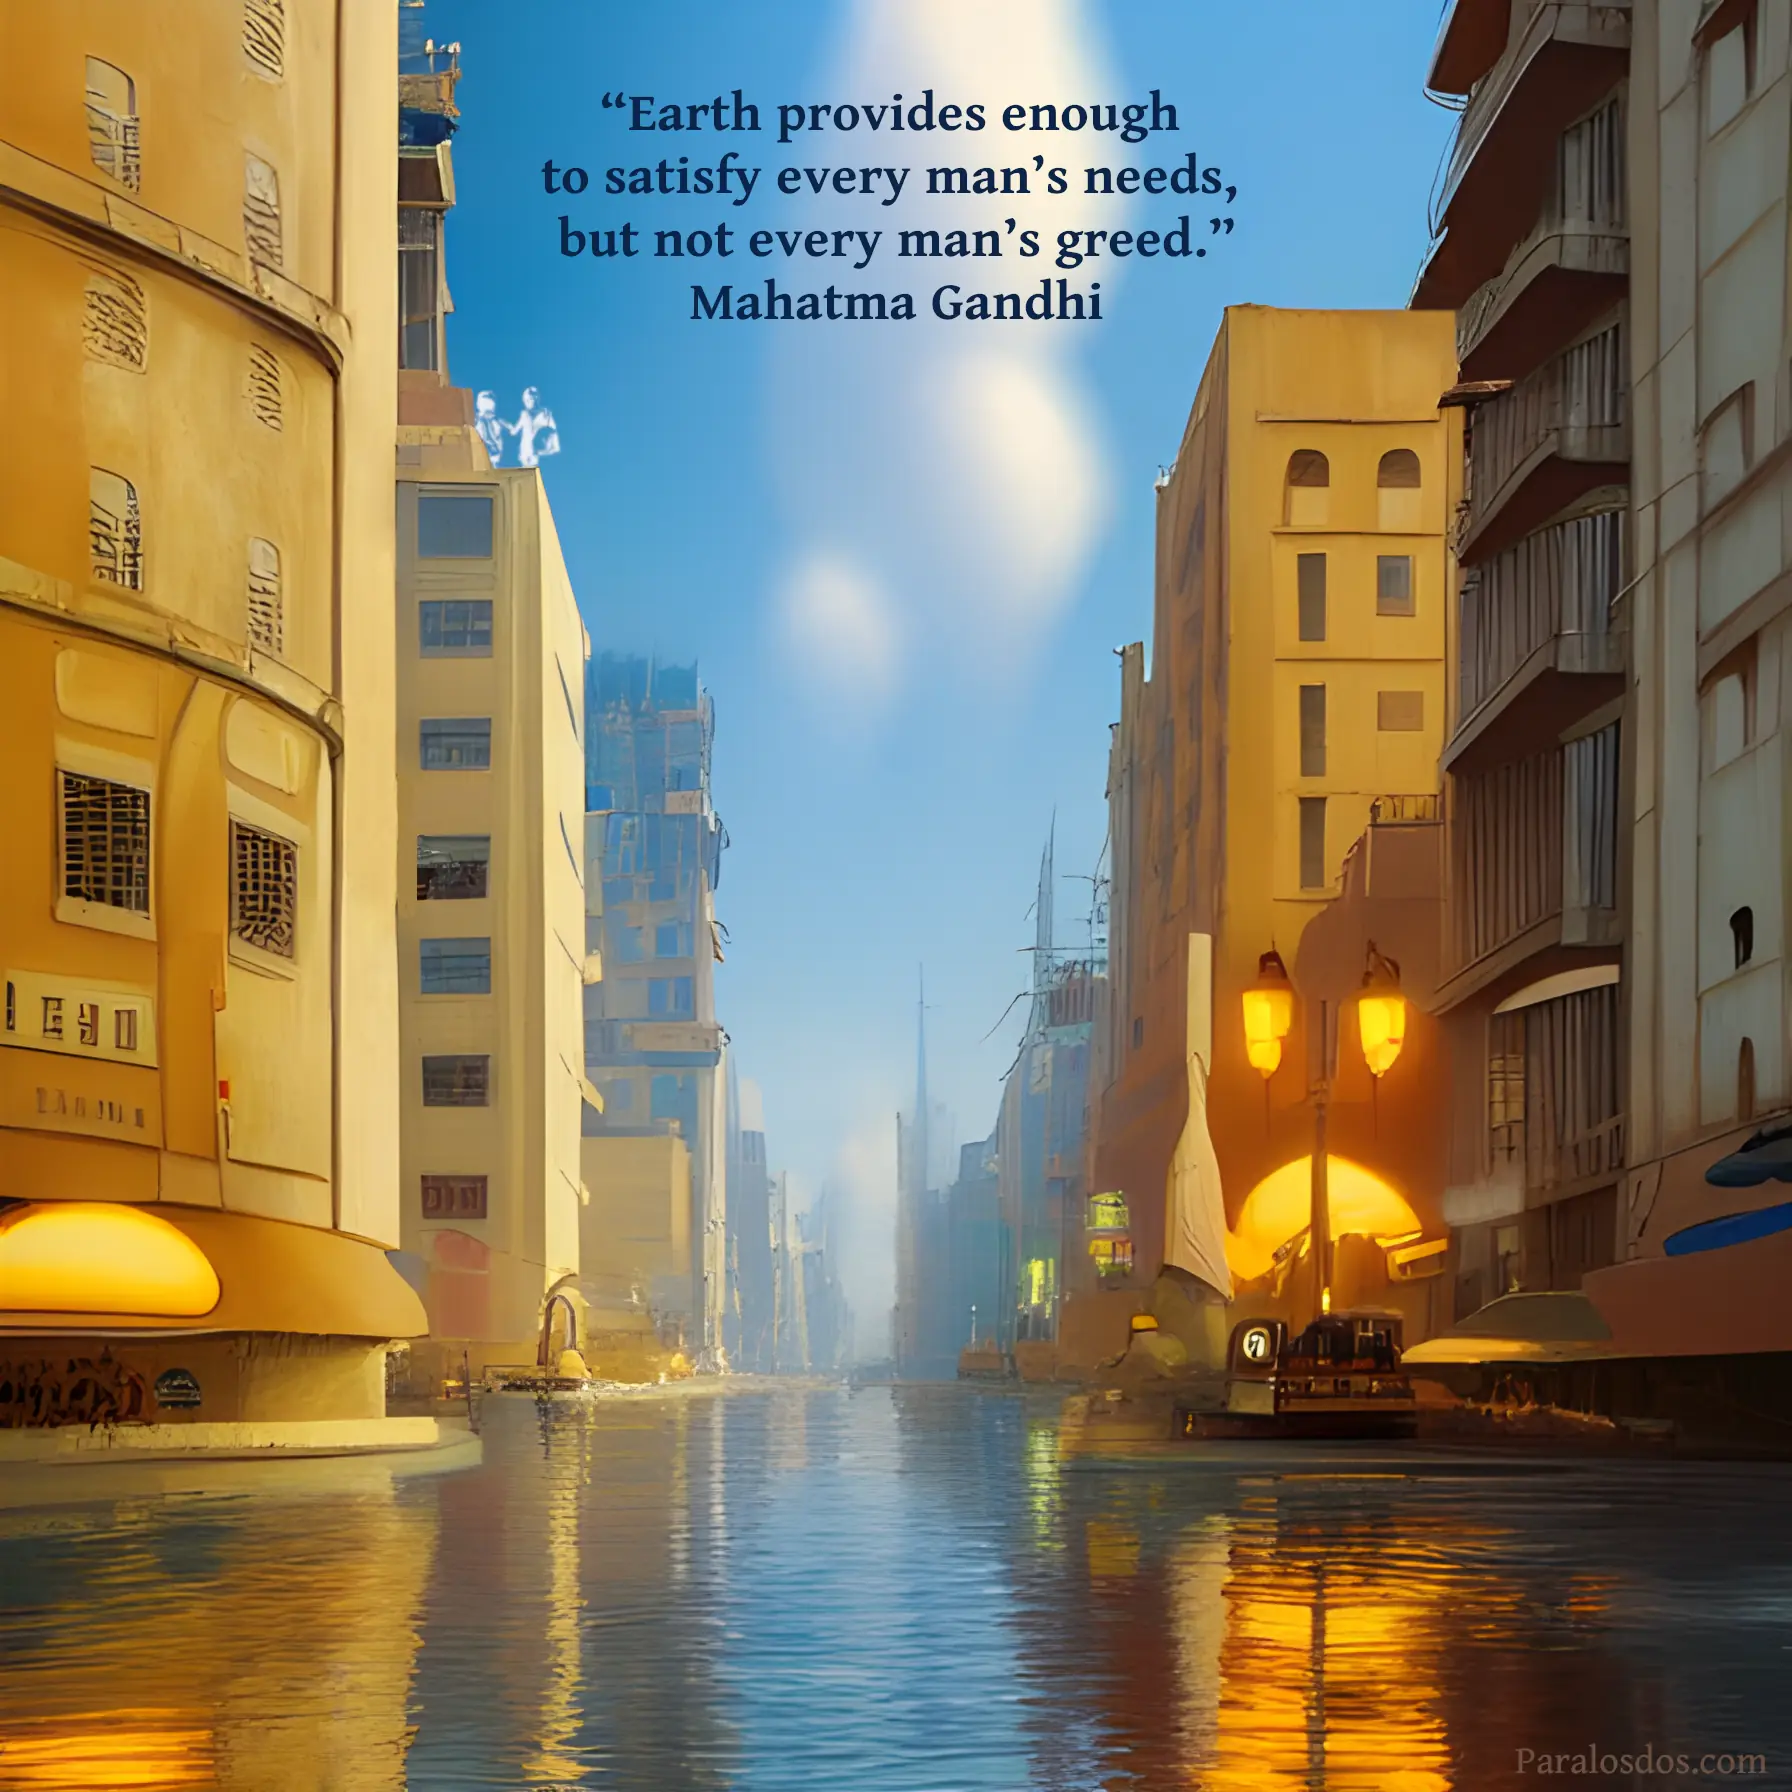 An artistic rendering of a city that appears to be flooded. A quote reads: “Earth provides enough to satisfy every man’s needs, but not every man’s greed.” - Mahatma Gandhi